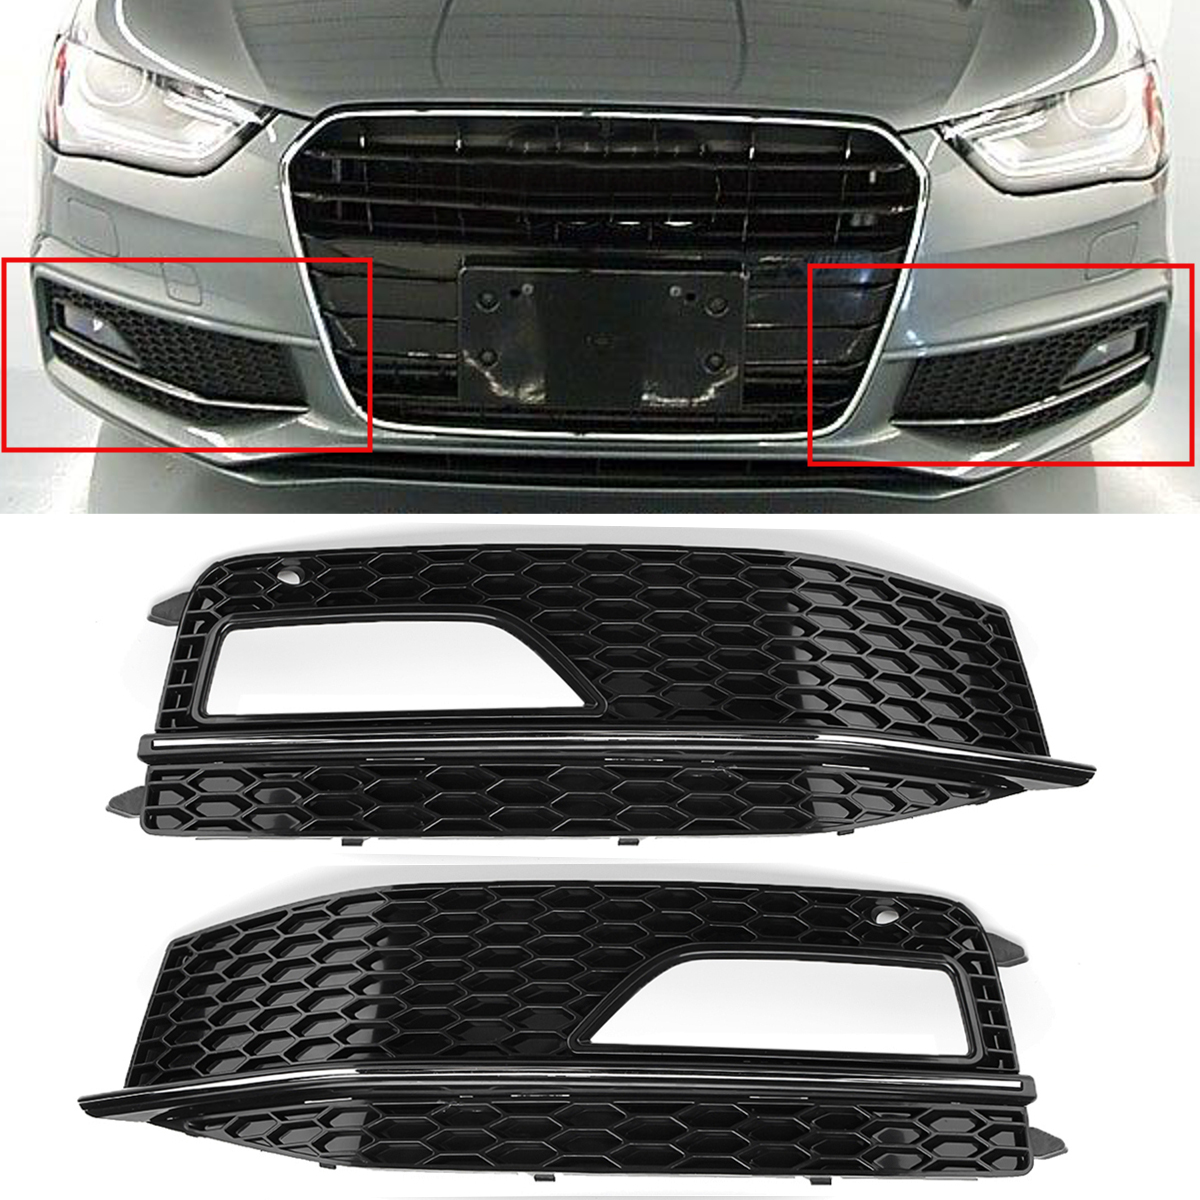 FOR Audi A4 A4 Quattro S4 2013-2016 Front Lower Center Bumper Cover Grille Grill 